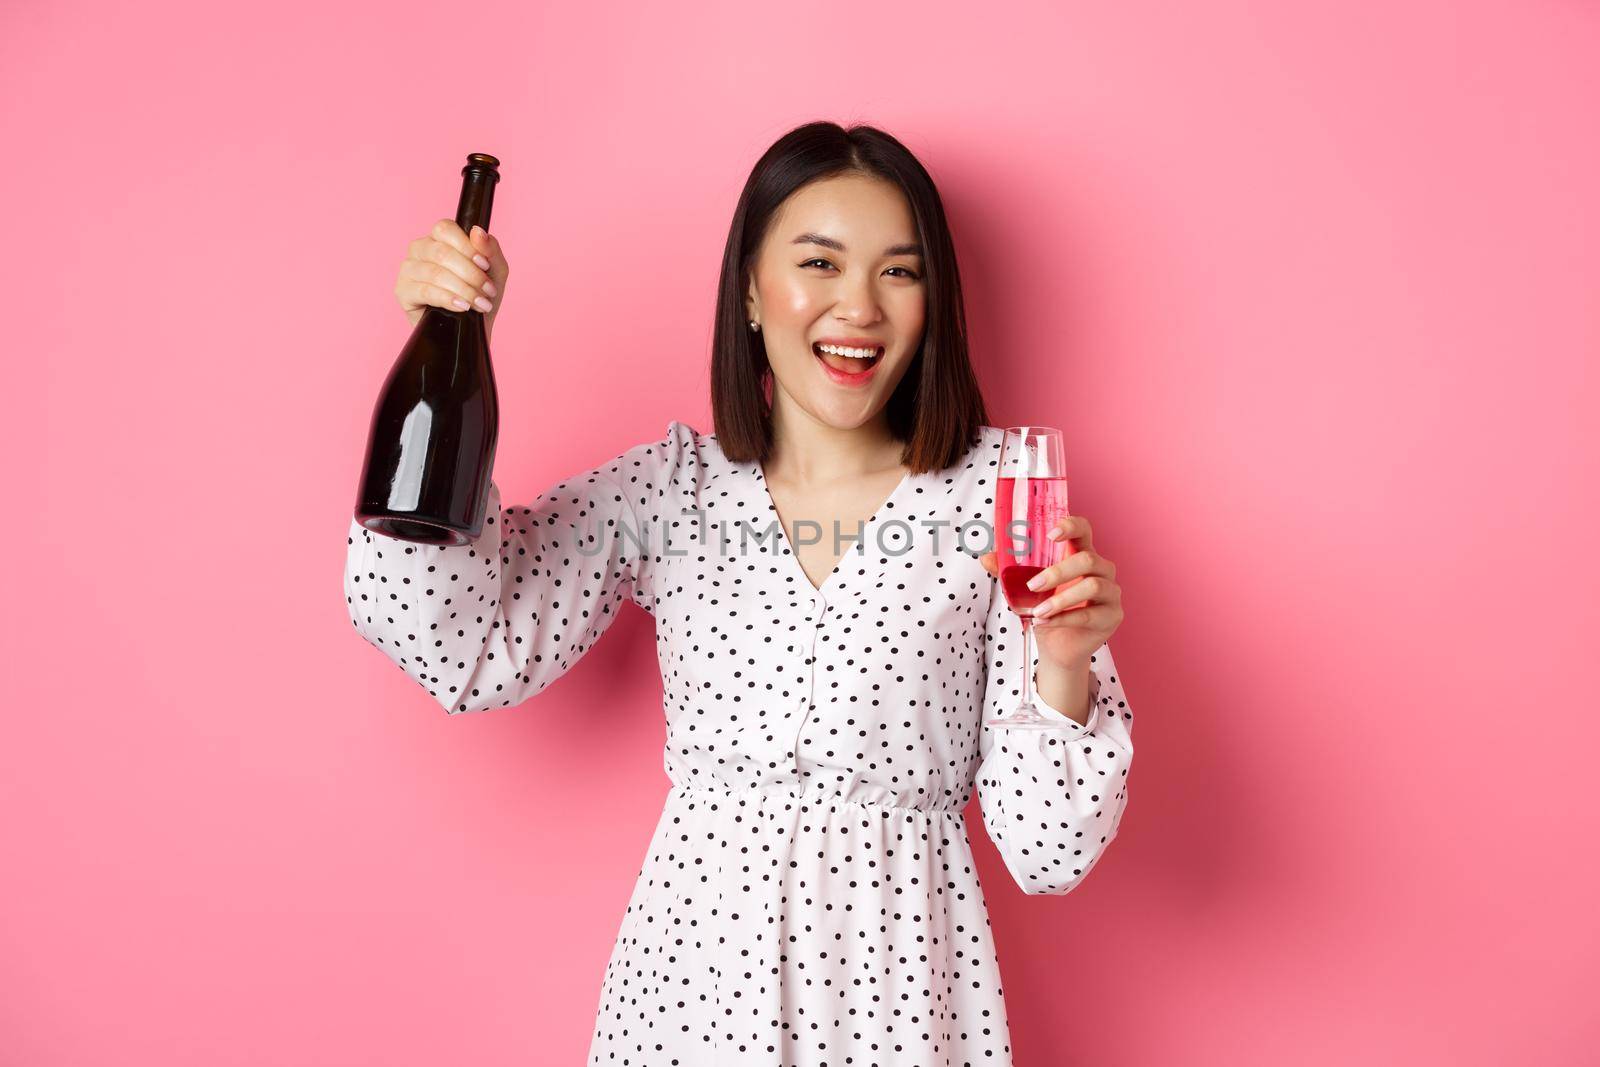 Happy asian woman celebrating, having fun and partying, pouring glass of champagne and laughing, standing over pink background.